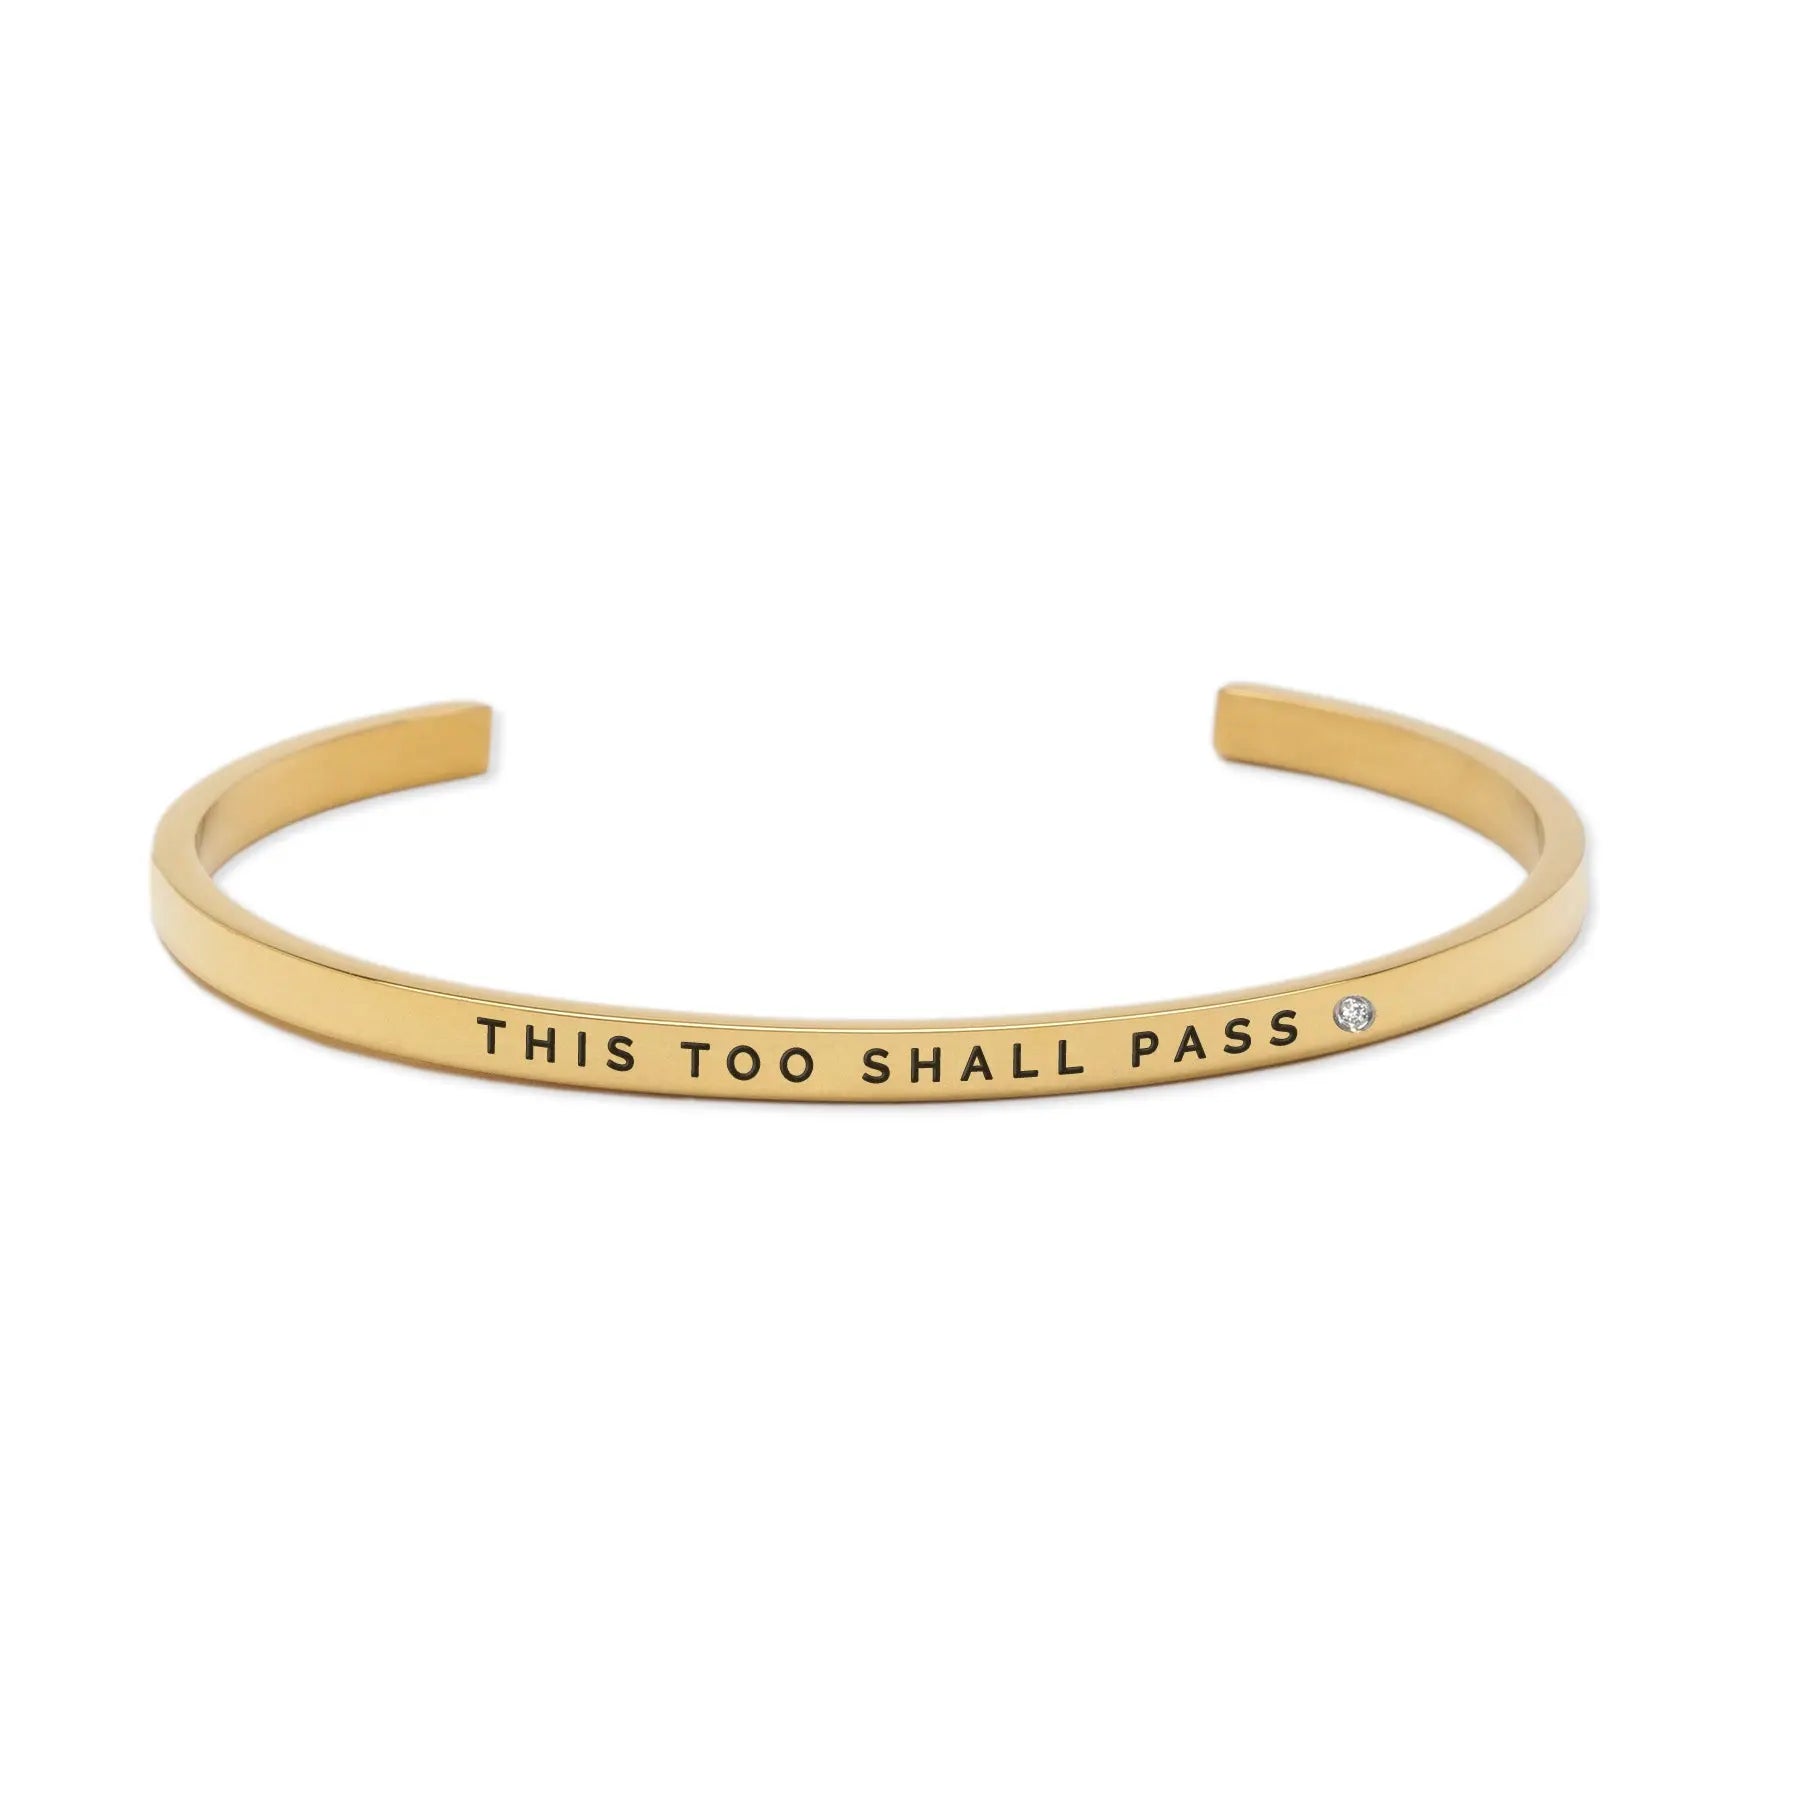 Engraved gold bracelet with This Too Shall Past message. Adjustable, durable stainless steel, 3mm width. Available in silver, rose gold.